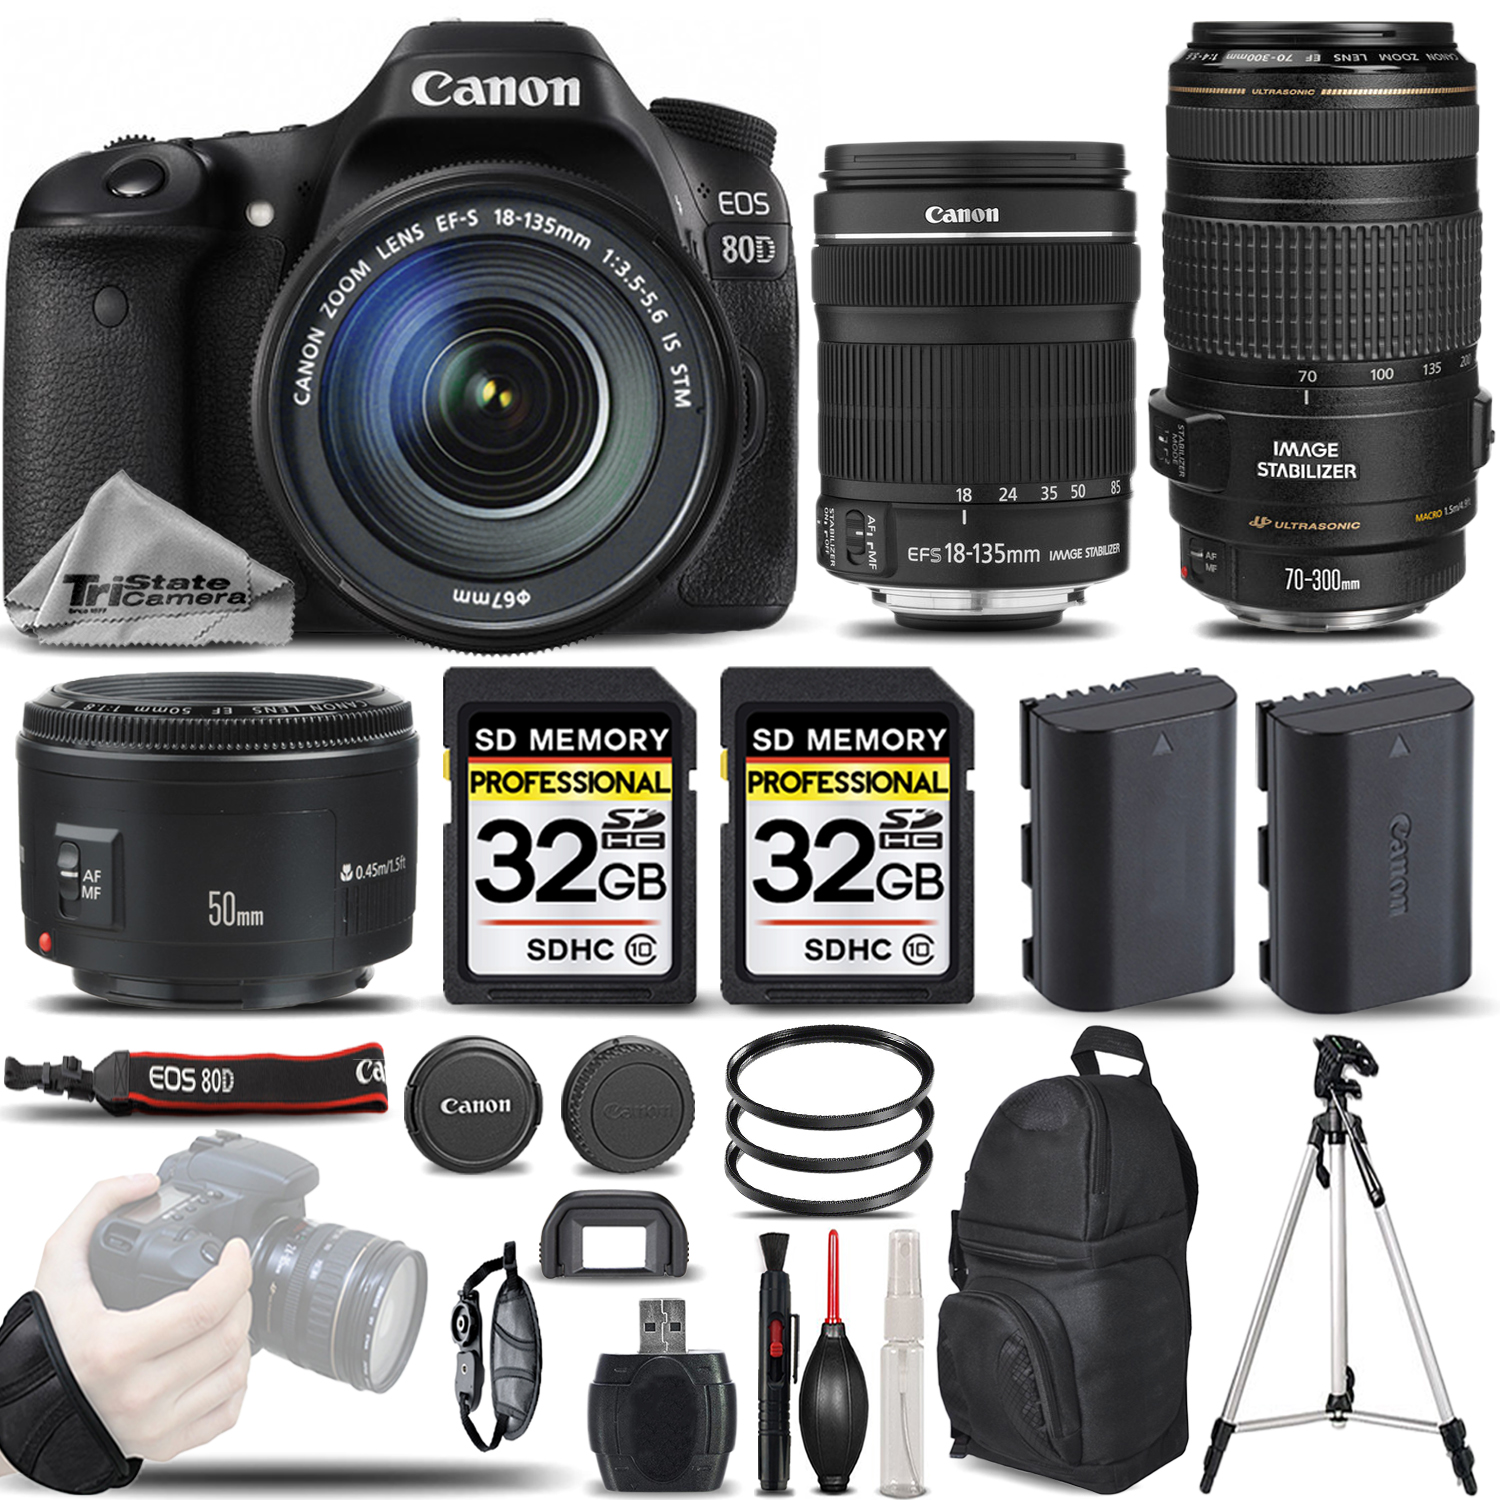 EOS 80D DSLR Camera + 18-135mm STM + Canon 70-300 USM + Canon 50mm 1.8 II *FREE SHIPPING*